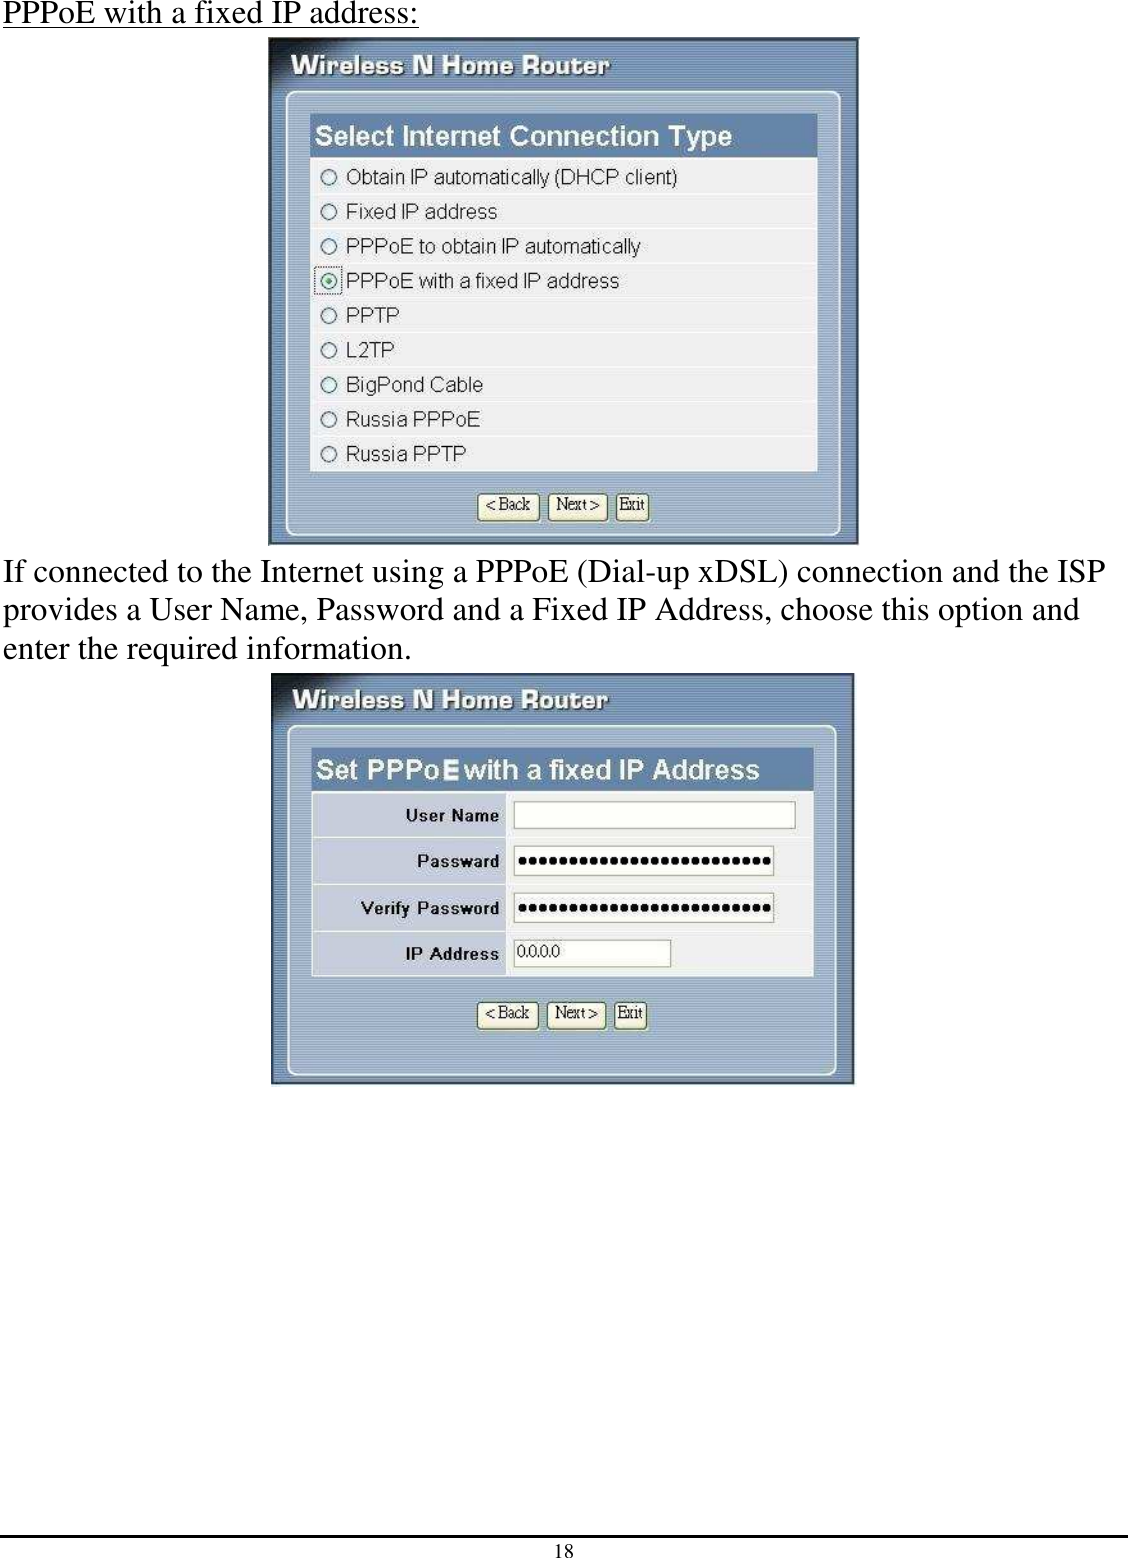 18 PPPoE with a fixed IP address:  If connected to the Internet using a PPPoE (Dial-up xDSL) connection and the ISP provides a User Name, Password and a Fixed IP Address, choose this option and enter the required information.  